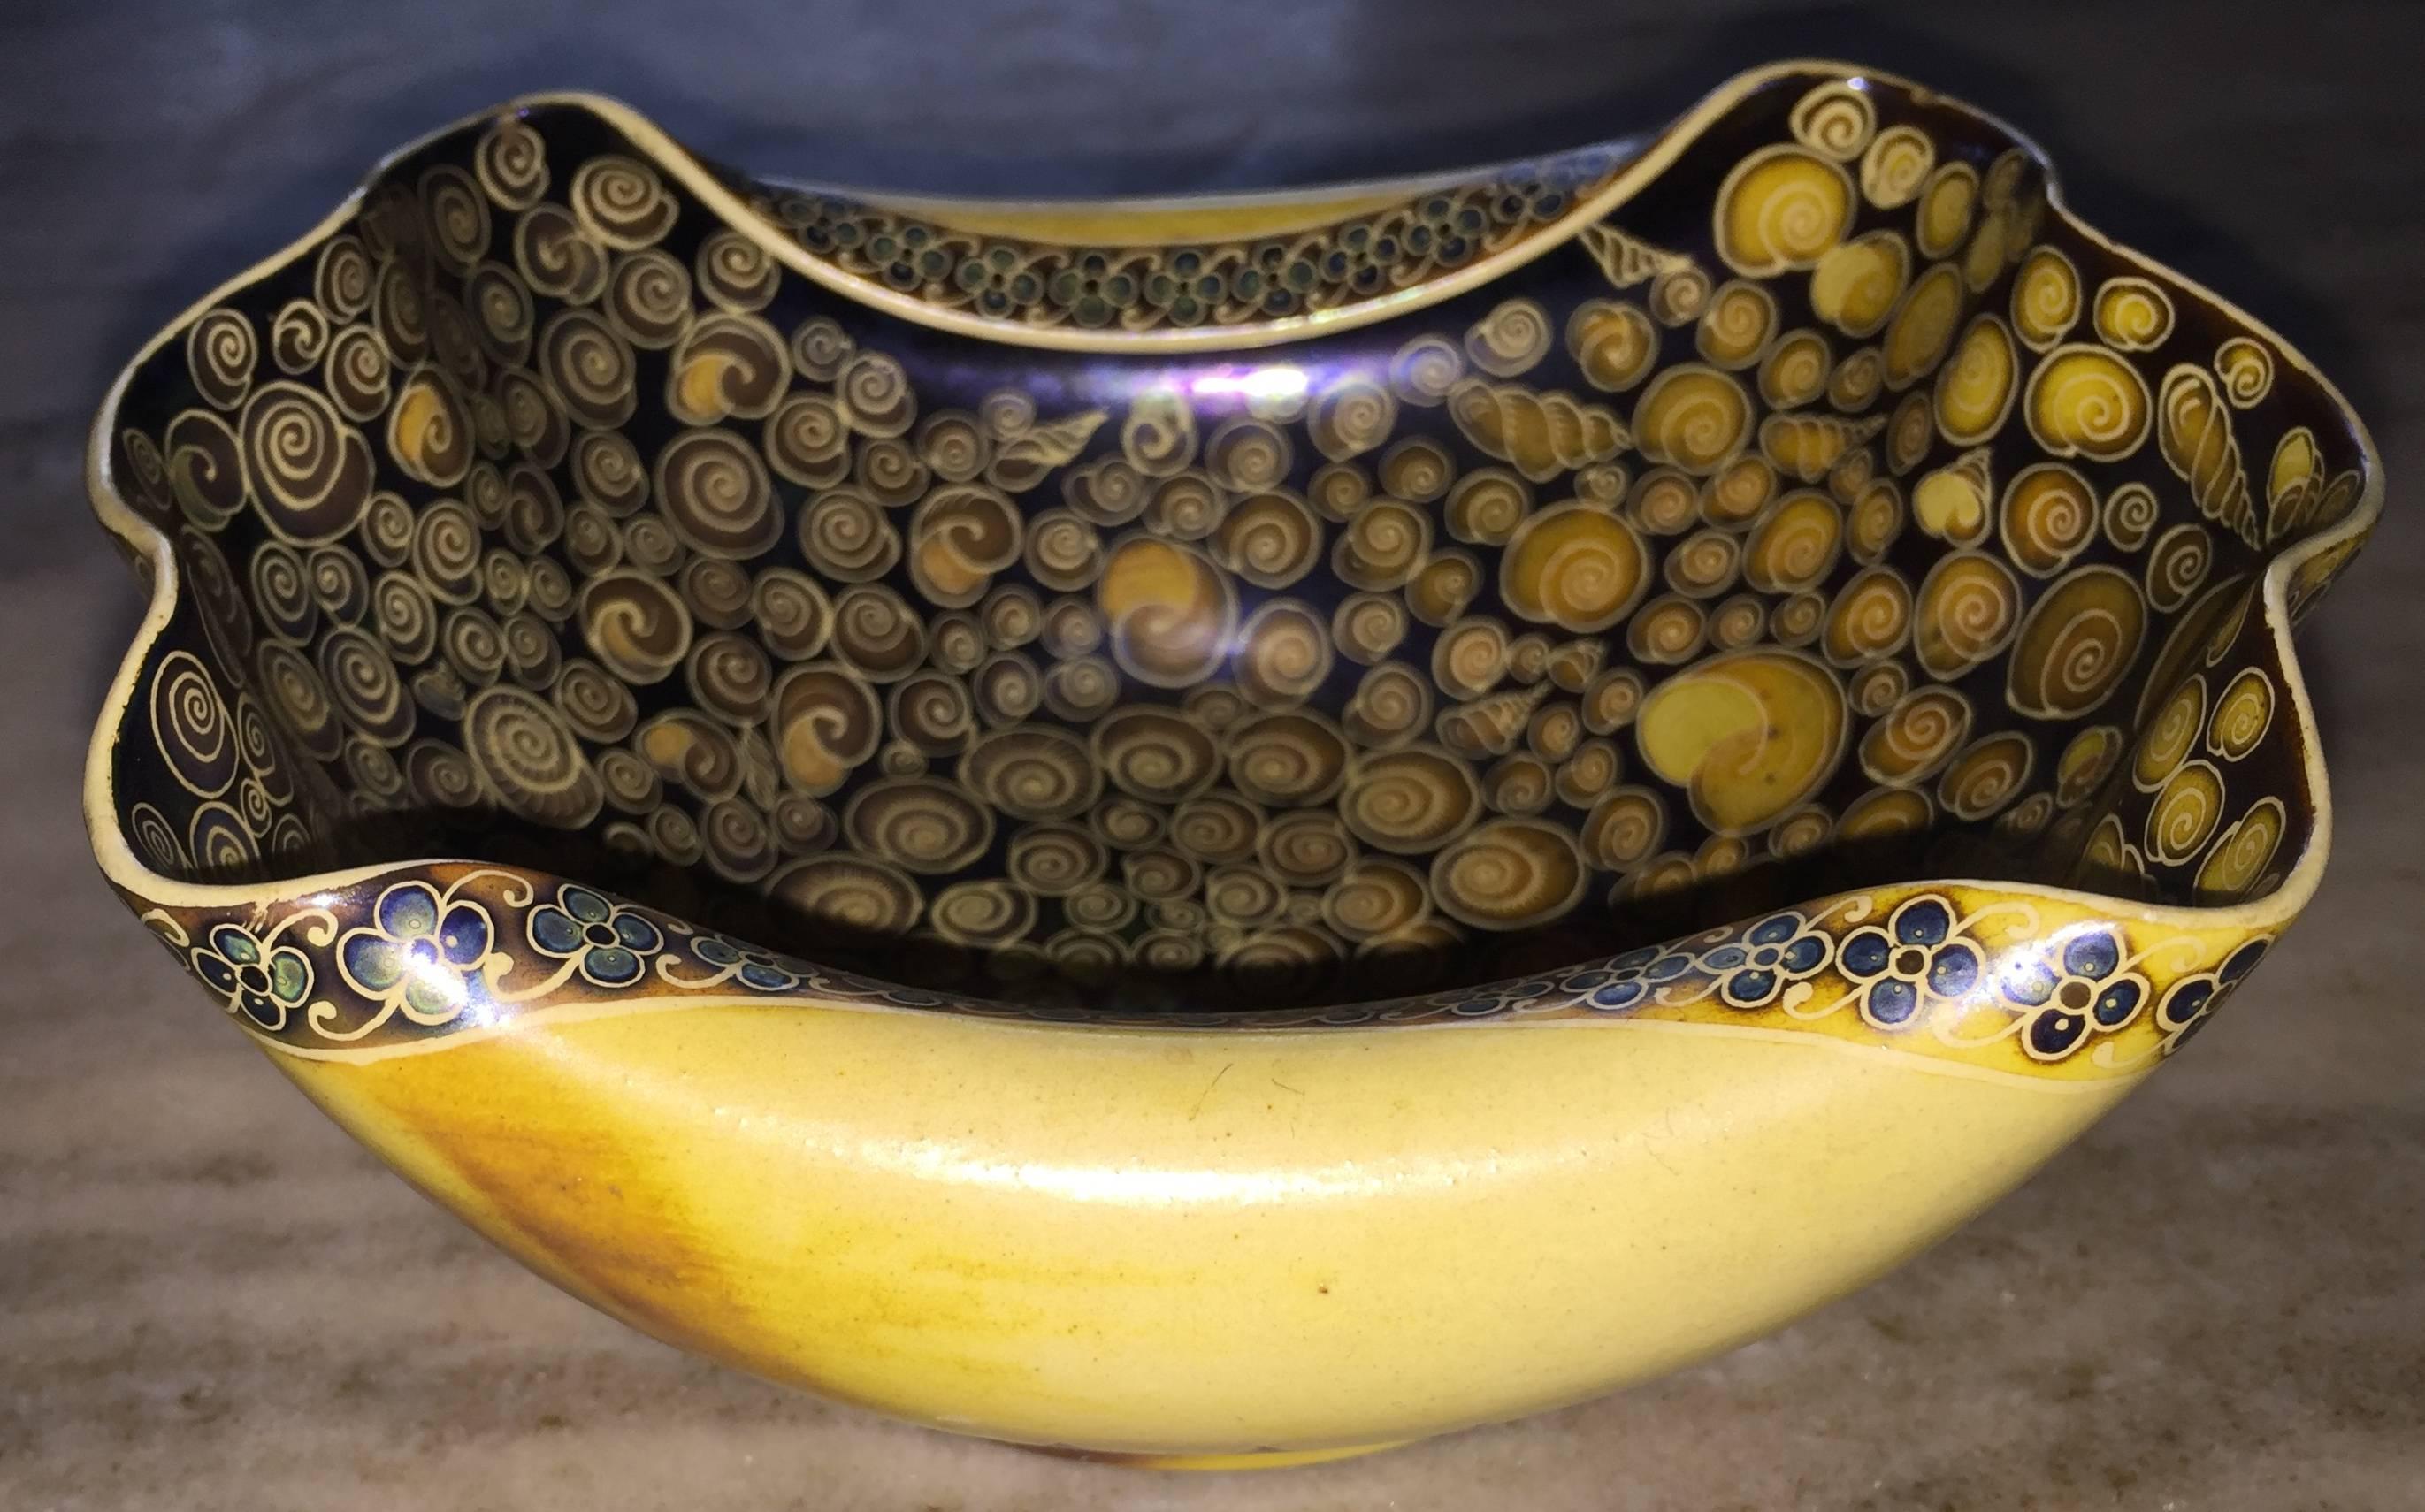 Tour de force of Art Nouveau ceramic design in a small scale work. Conch shell pinched vessel with eosin iridescent glazed interior covered in 100 of hand-painted nautilus shells. Exterior is mottled mustard glaze with top and bottom painted